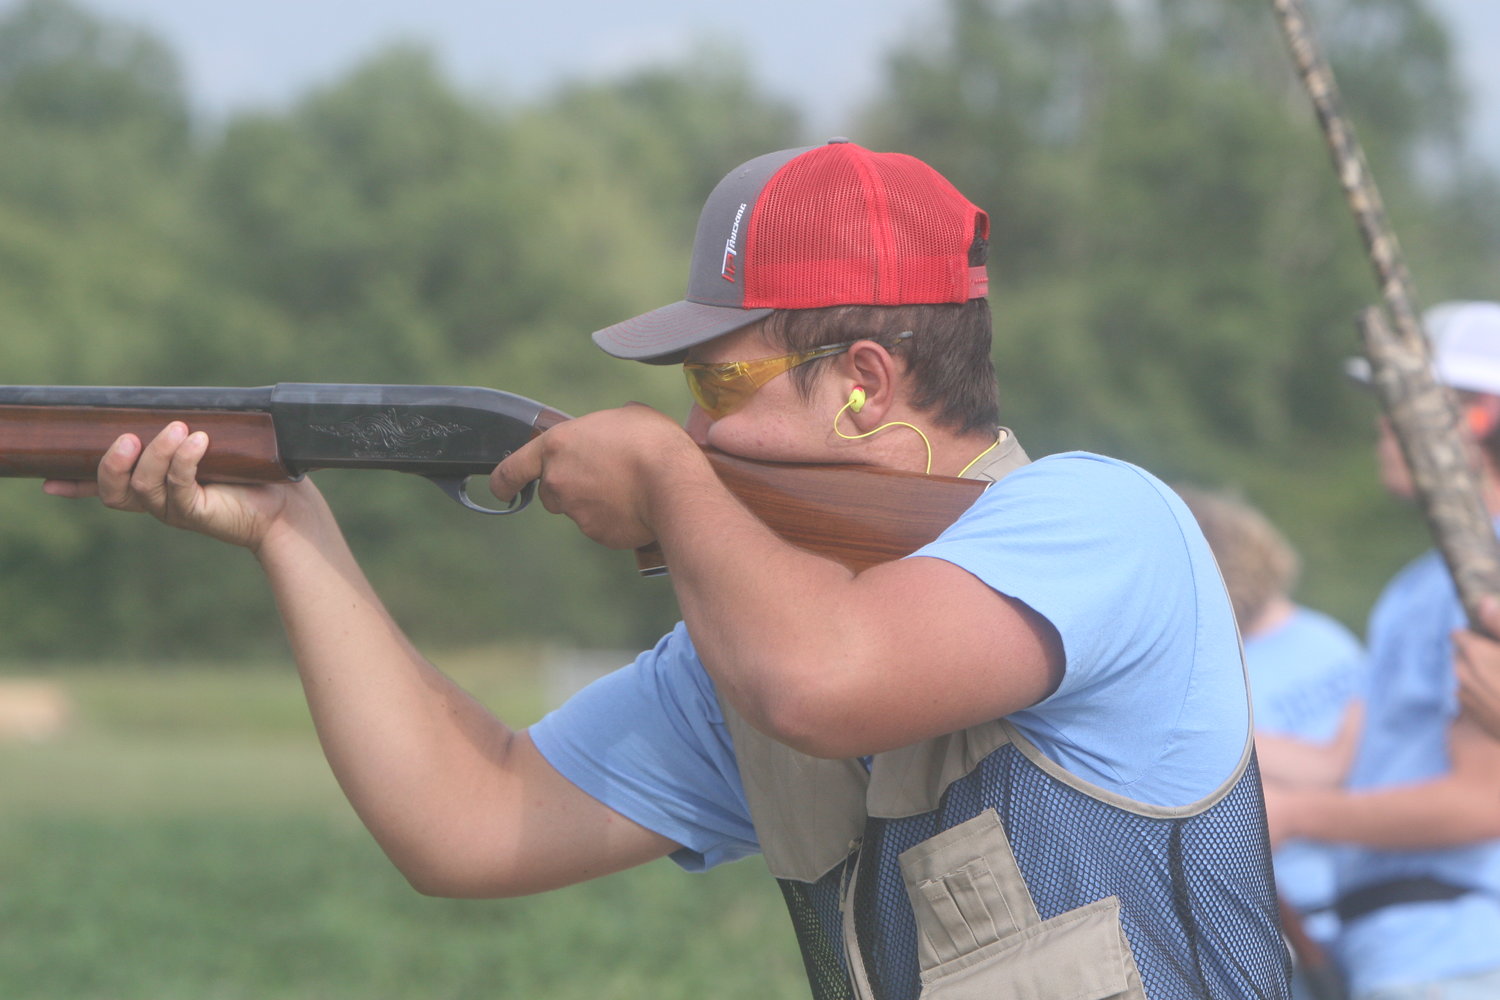 Montgomery County senior Griffen Rakers goes for a shot during a trapshooting match at Community R-6 High School on Sept. 6. Rakers scored 25 out of 25 during a practice session on Aug. 29.